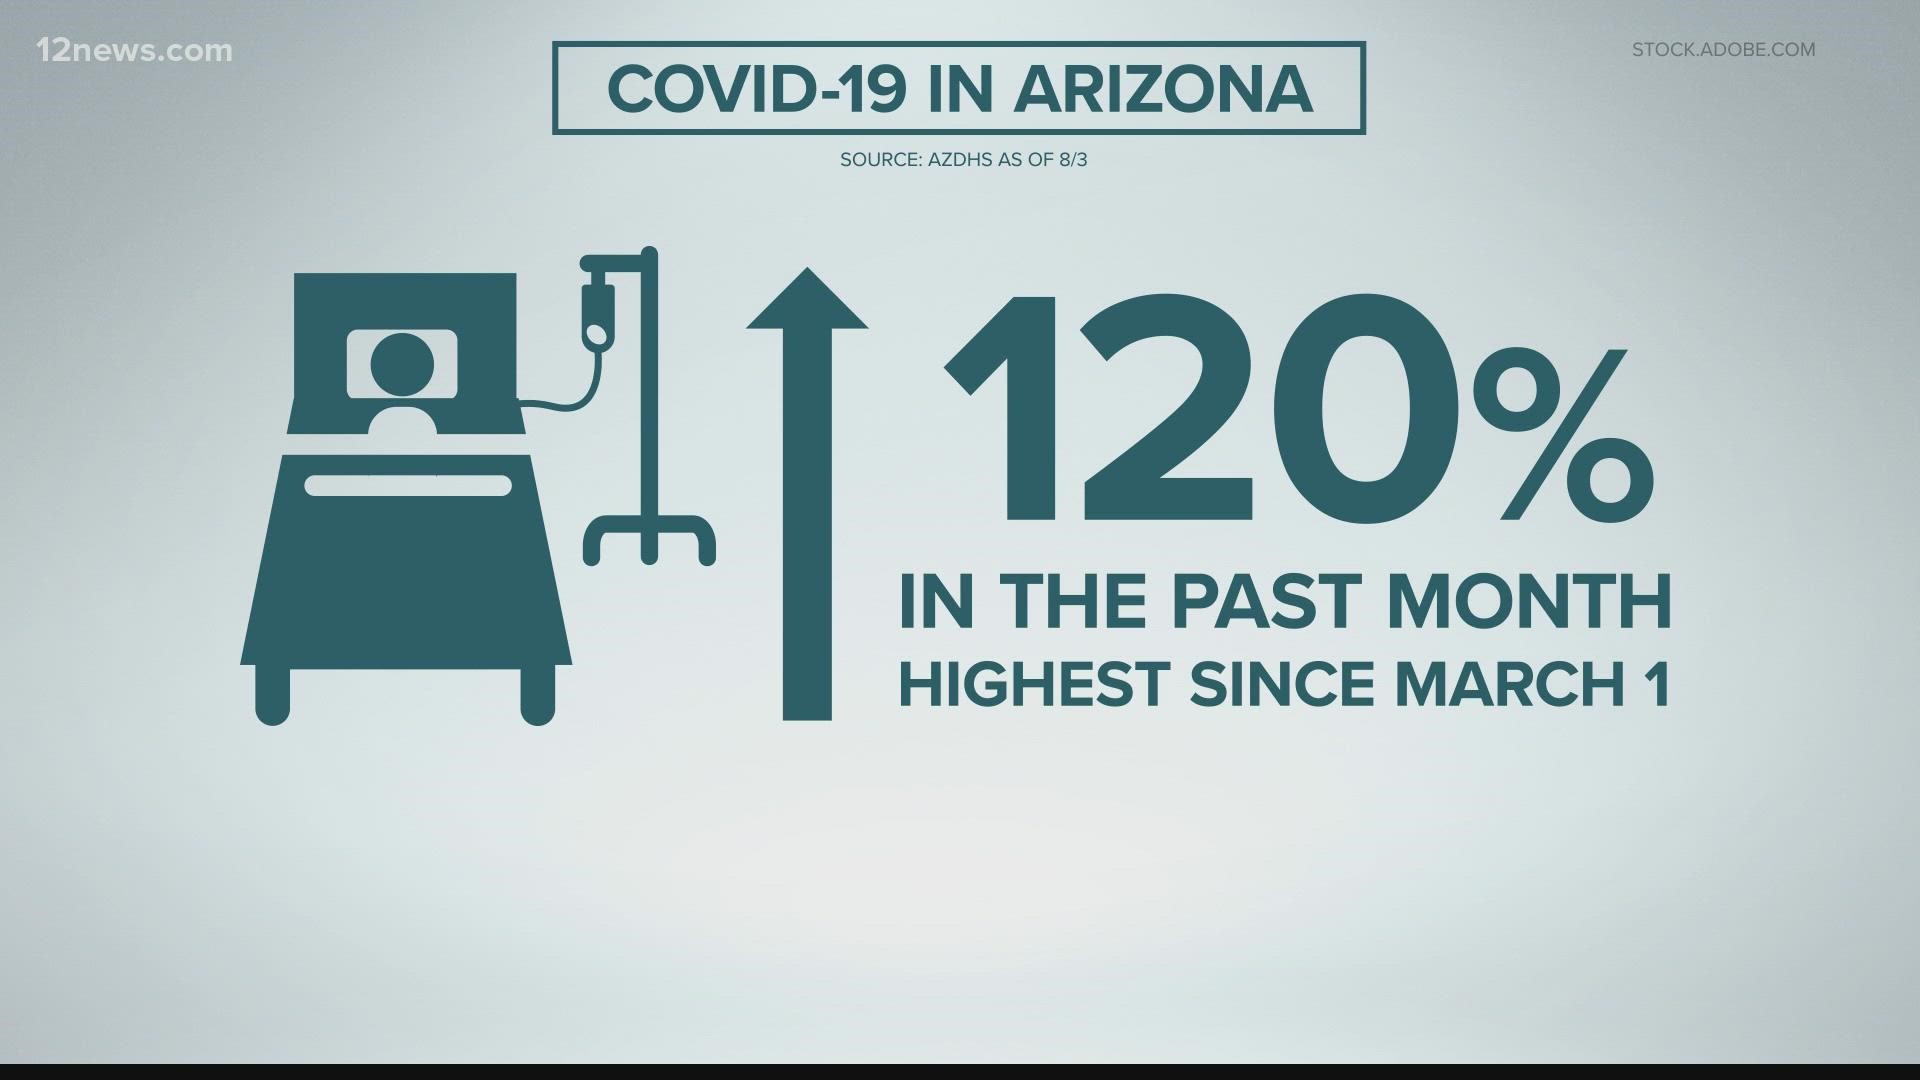 Banner Health, Arizona's largest healthcare provider, is concerned about the surge of COVID-19 cases in the state. Since July 1, there has been a 96% jump in cases.